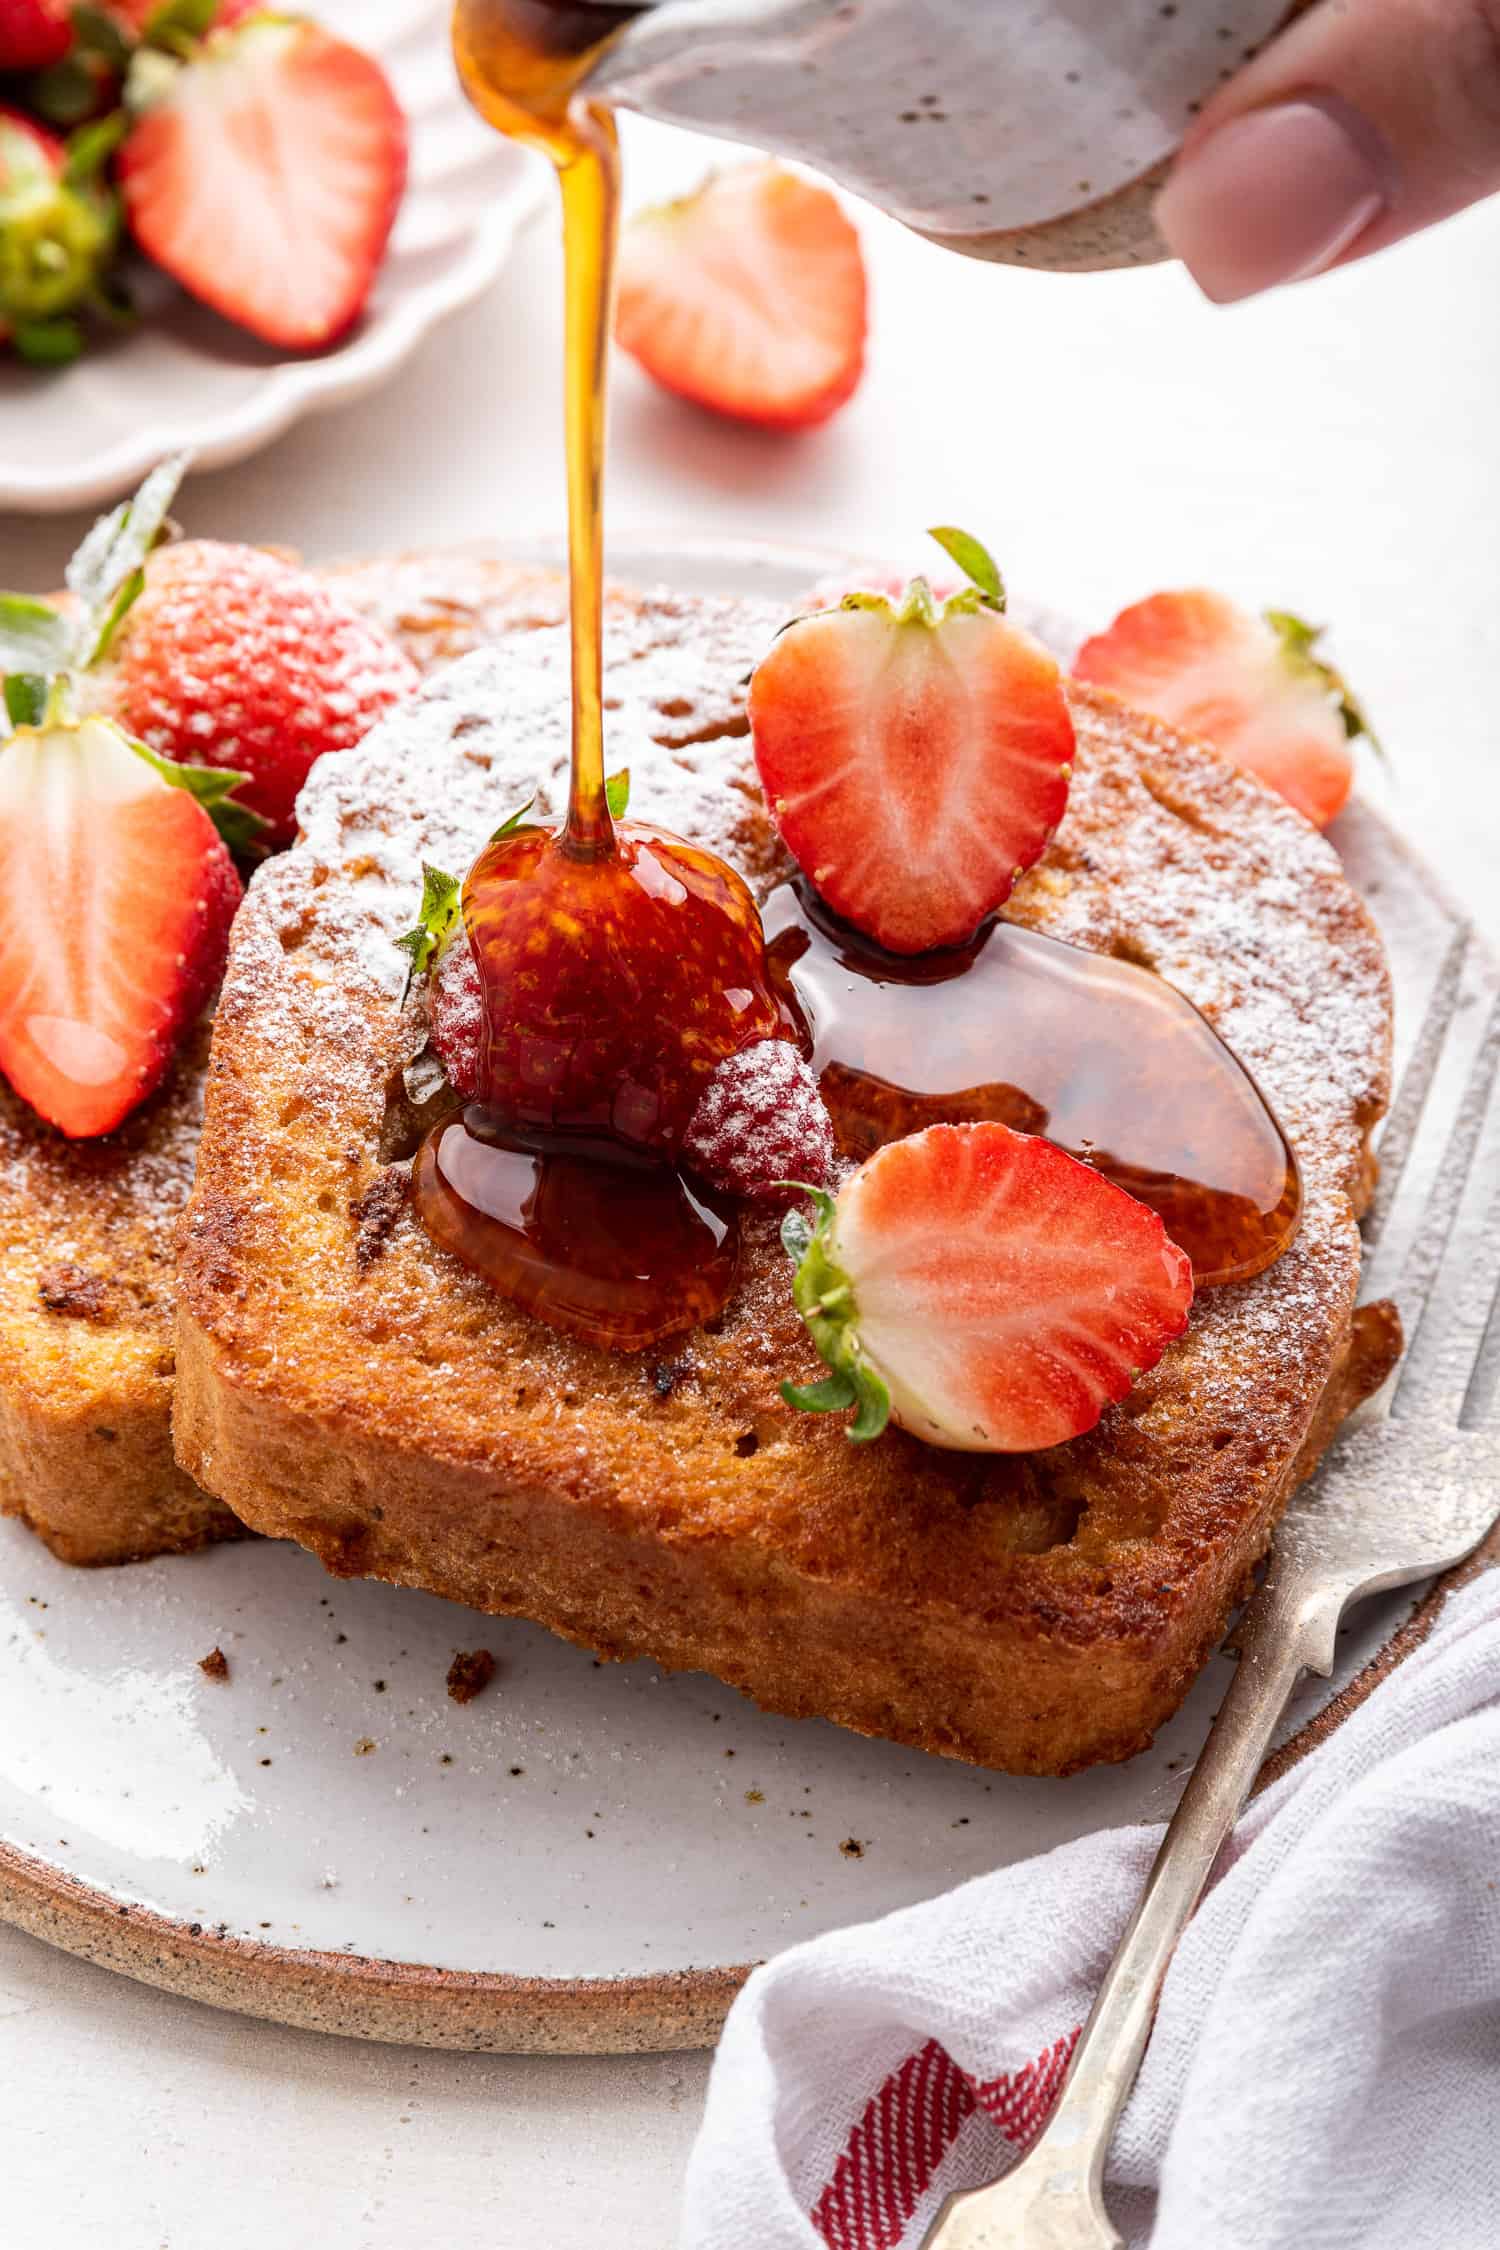 How to Make Crispy French Toast